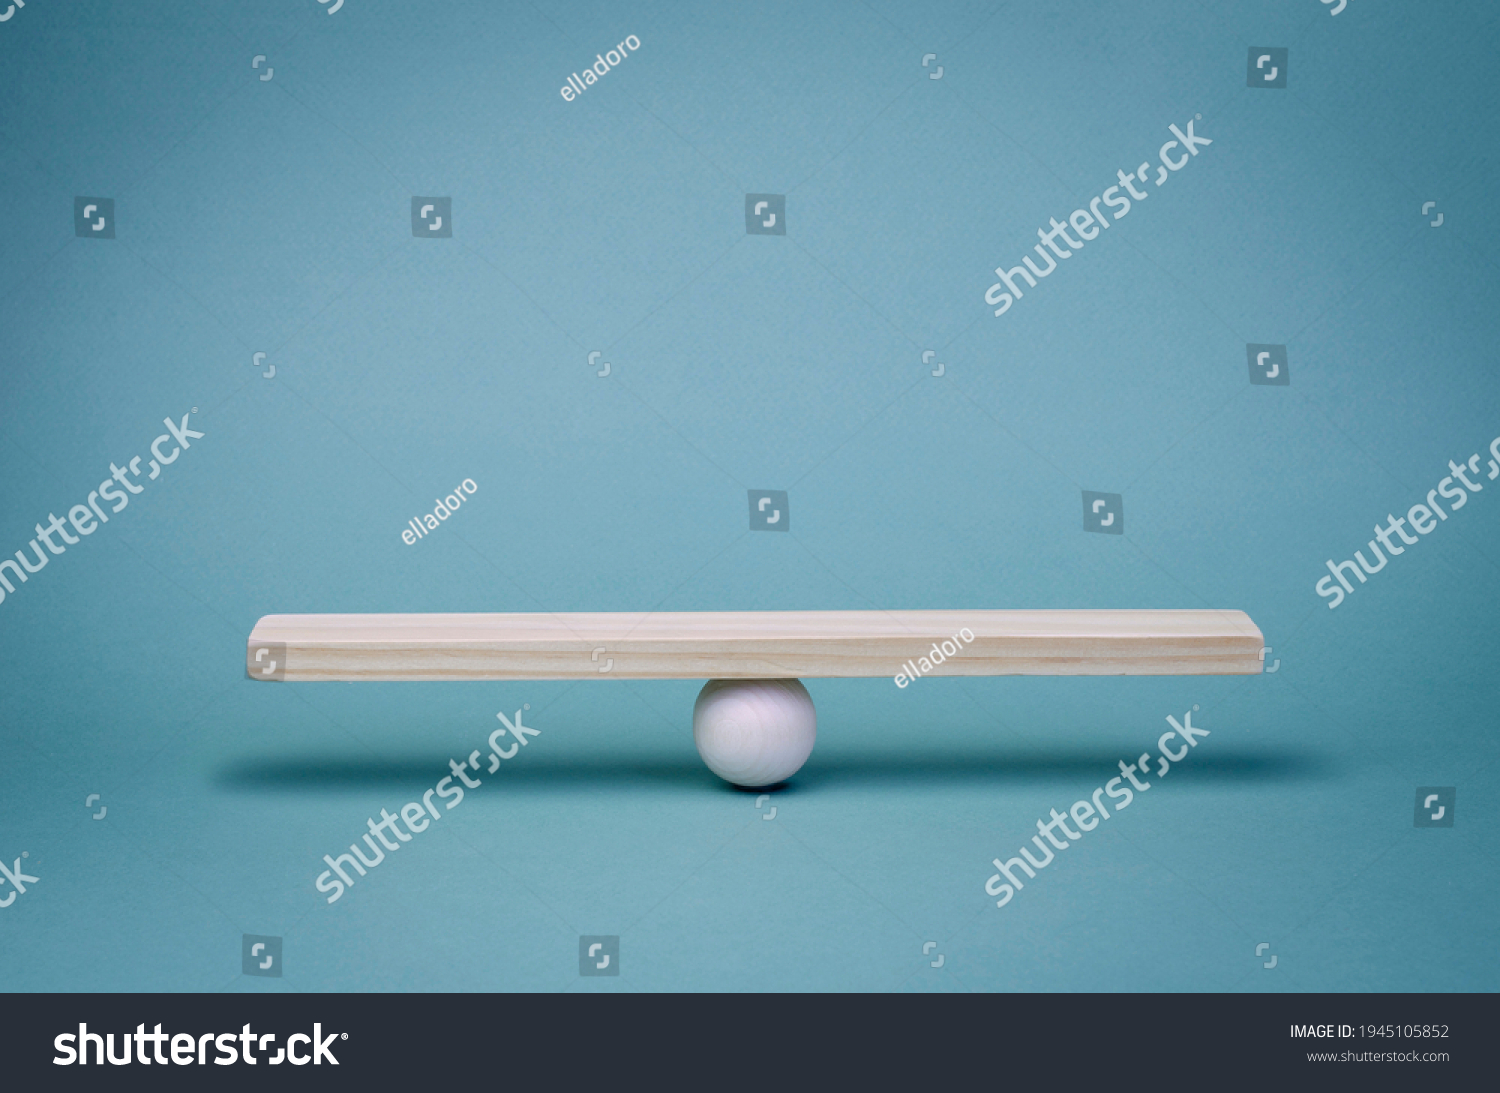 Stability, balance and equality in business partnerships in economic relations. Business finance concept. Wooden scale on a turquoise background. #1945105852